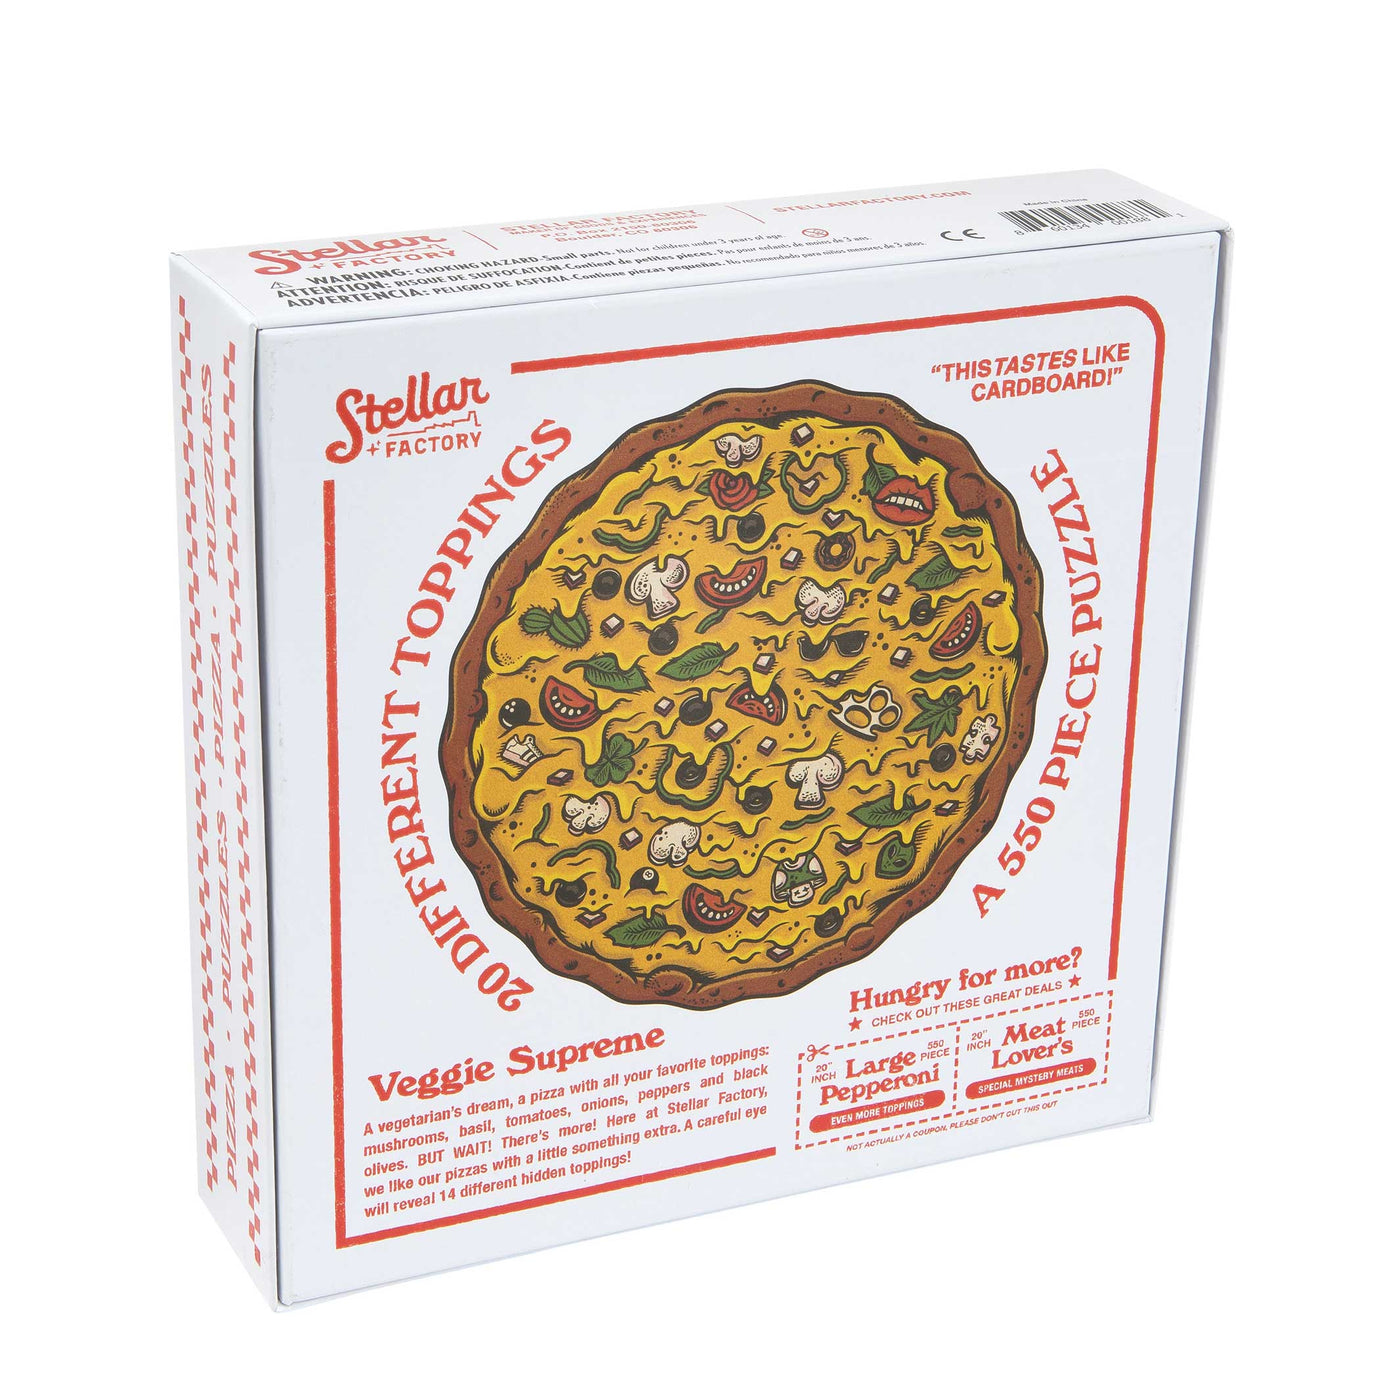 Back of Packaging for Pizza Puzzle Veggie Supreme Jigsaw Puzzle